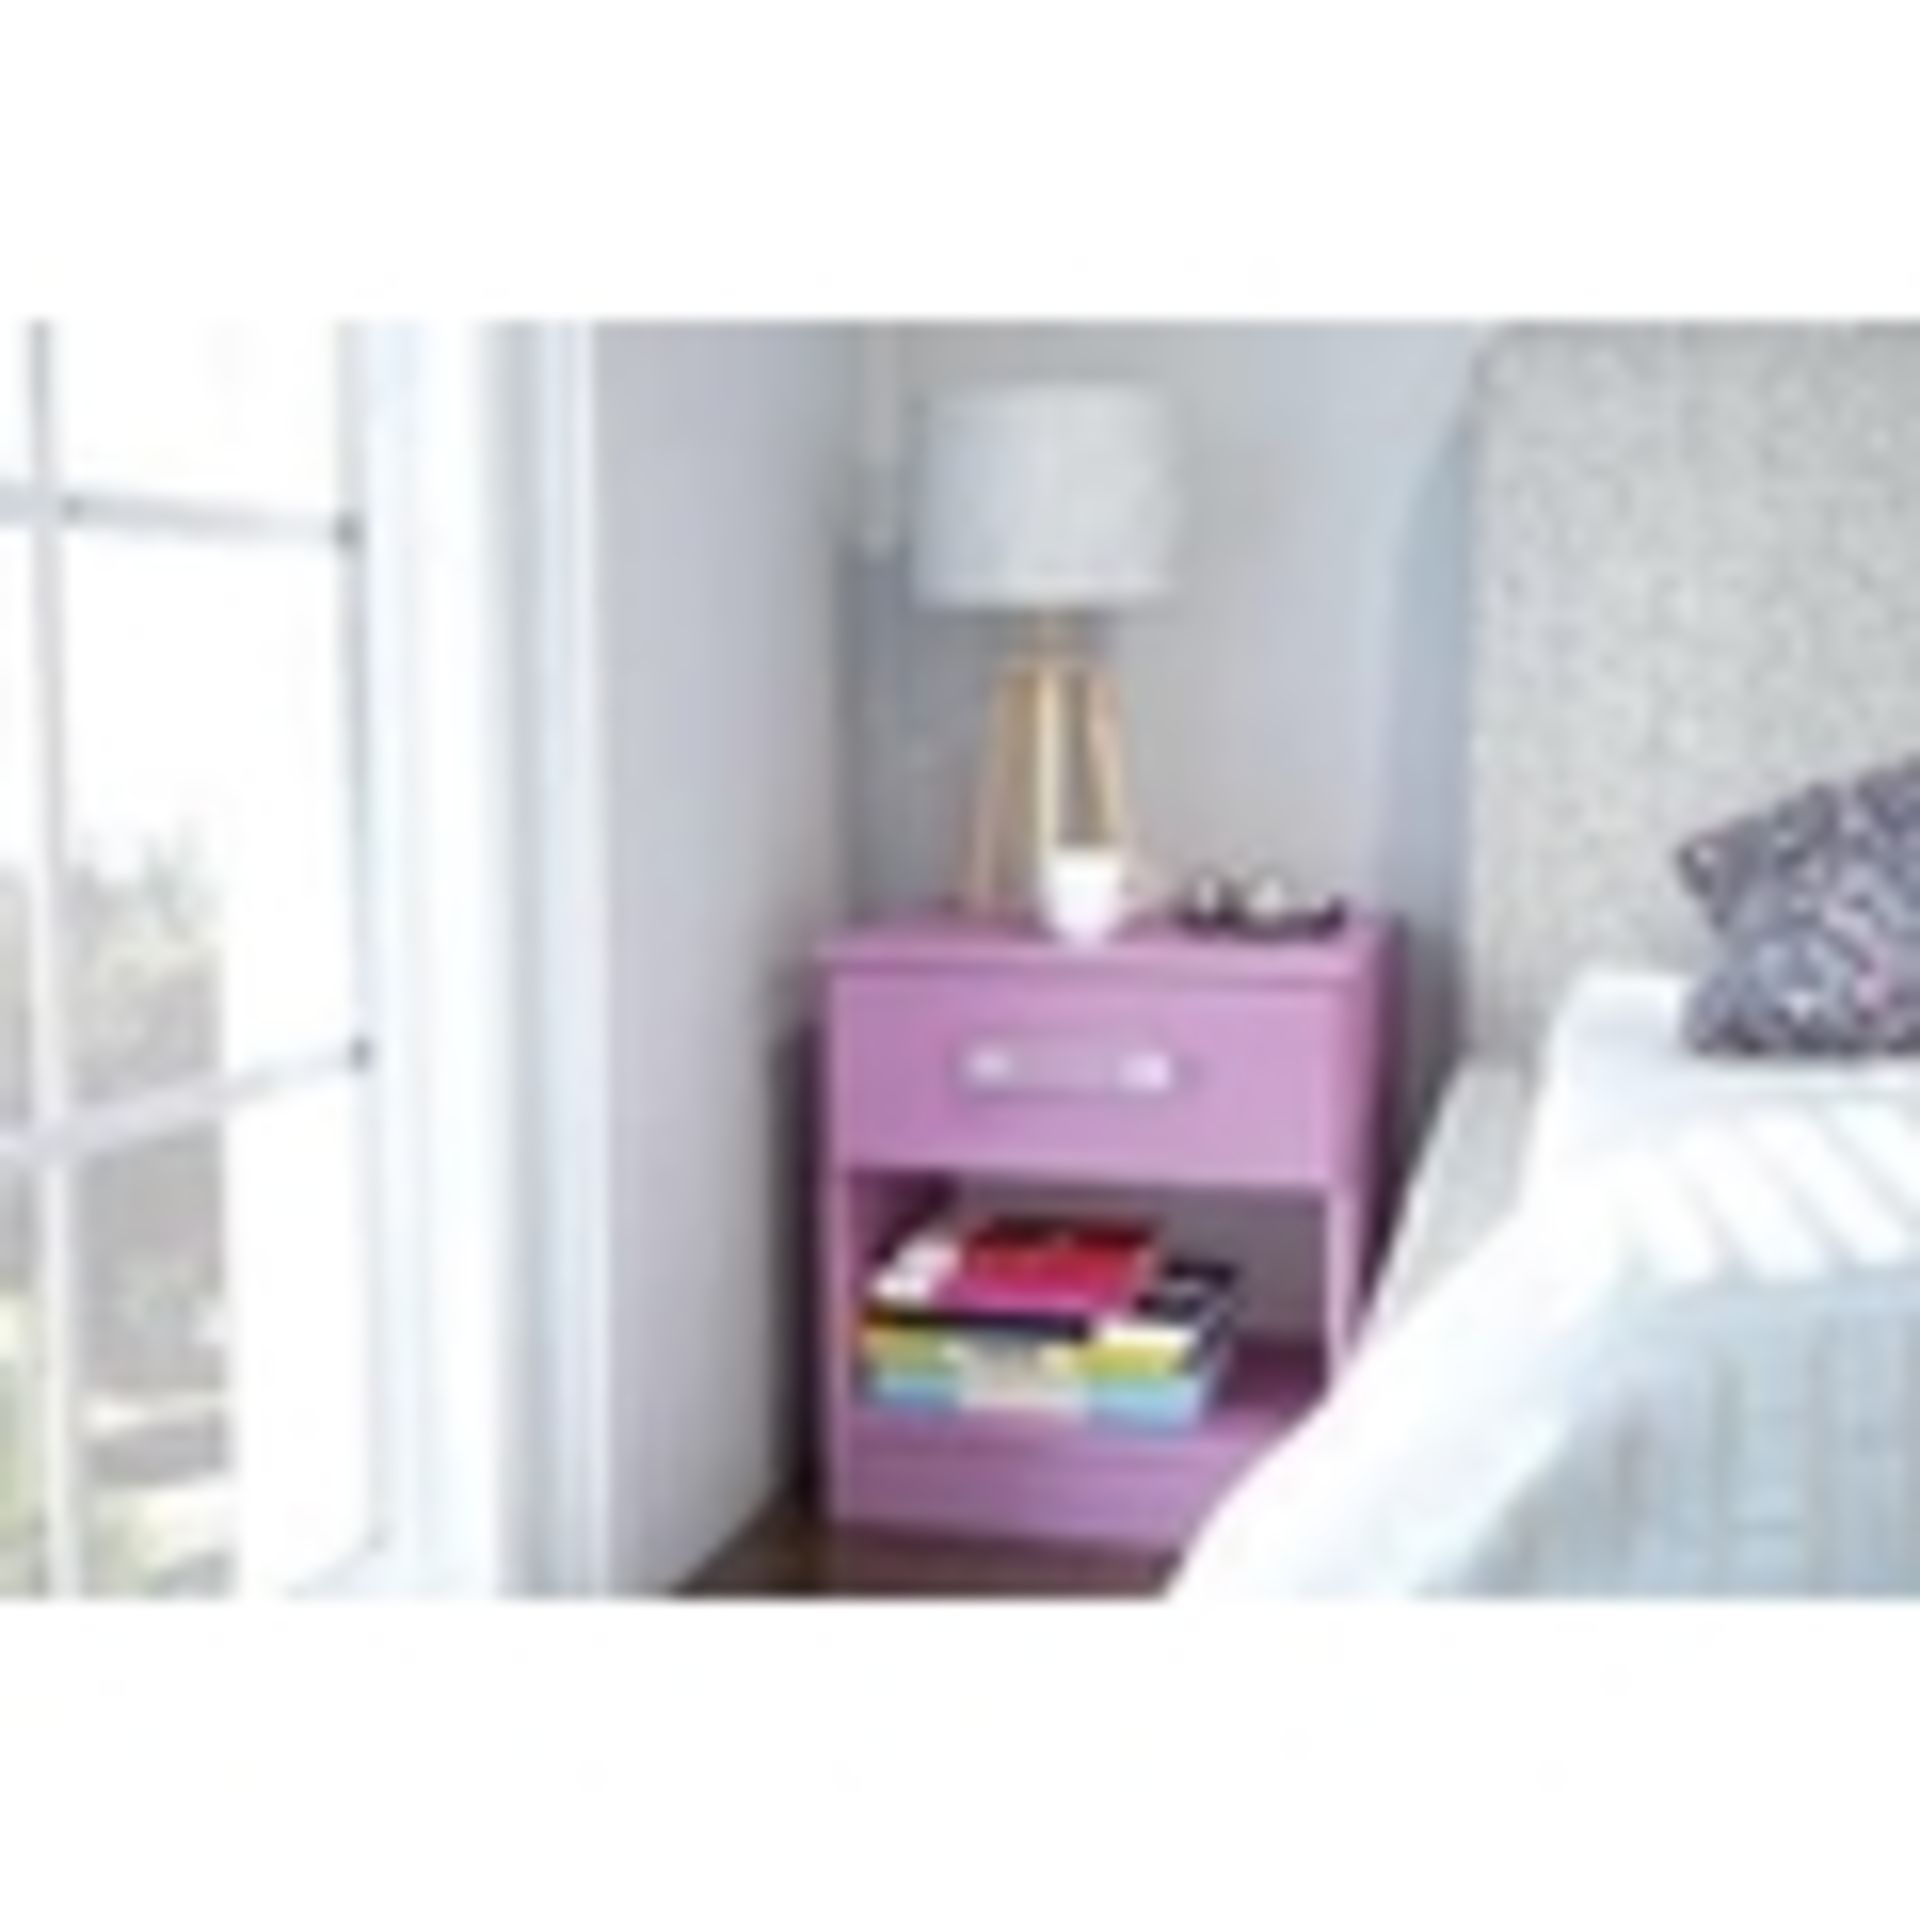 1 BRAND NEW BOXED REFLECT PINK 1 DRAWER BEDSIDE CA